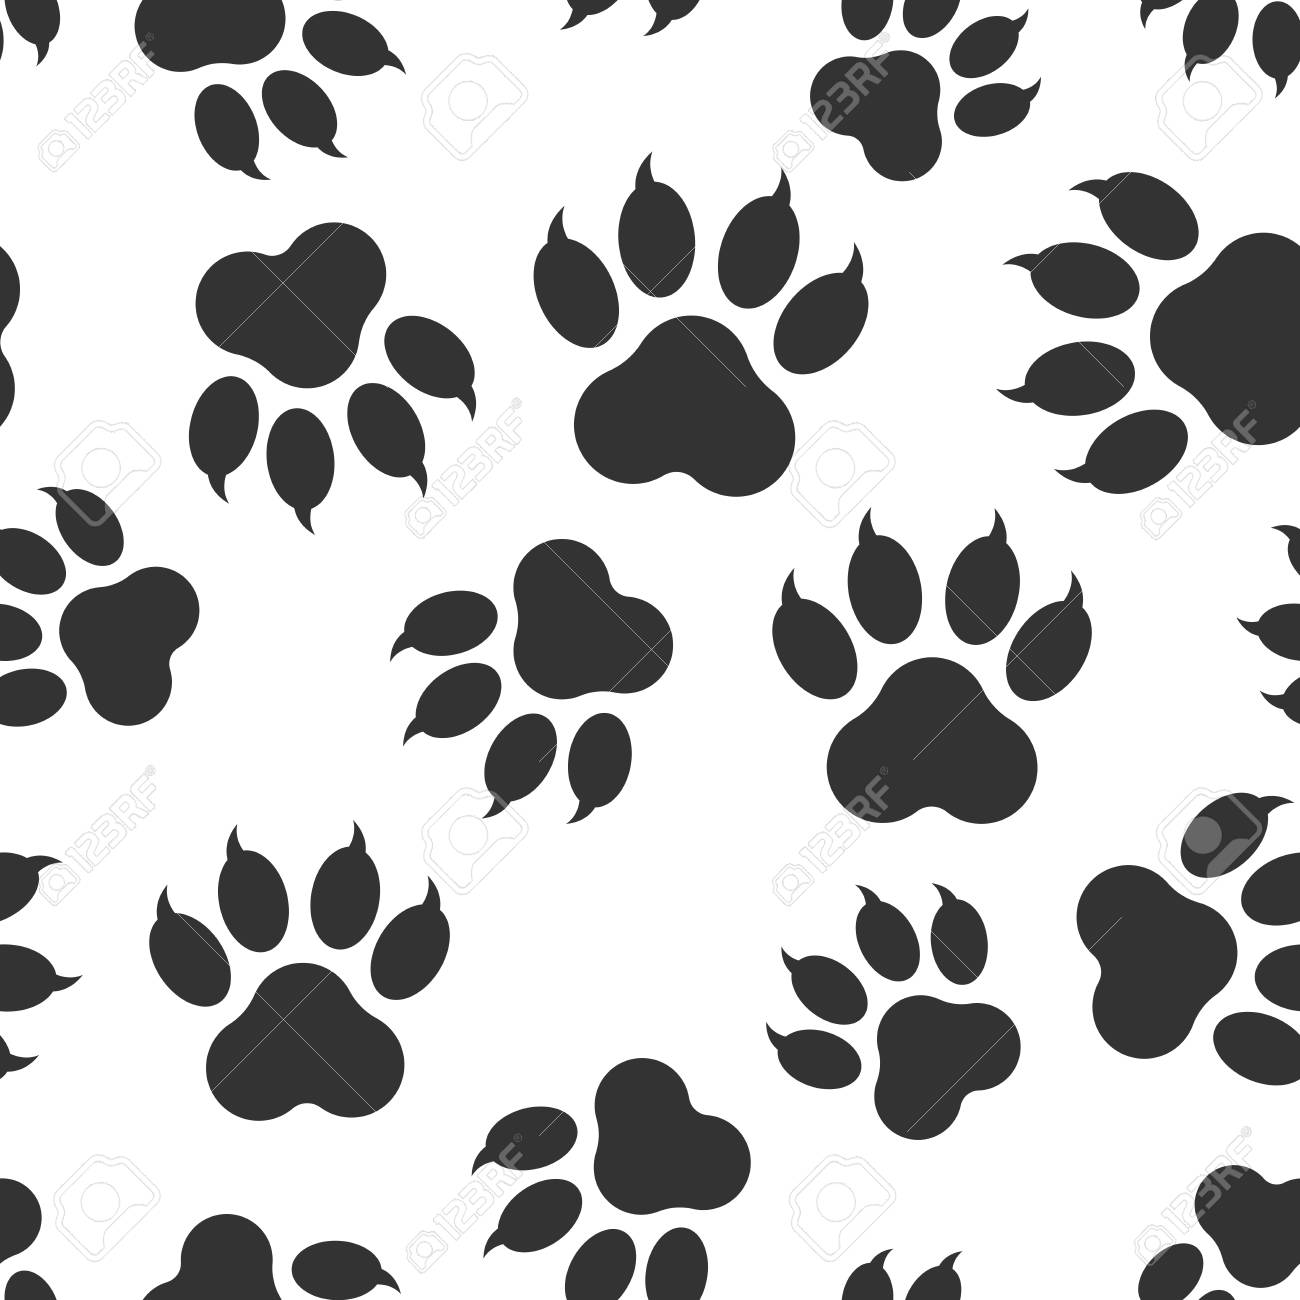 Paw Print Icon Seamless Pattern Background Business Flat Vector